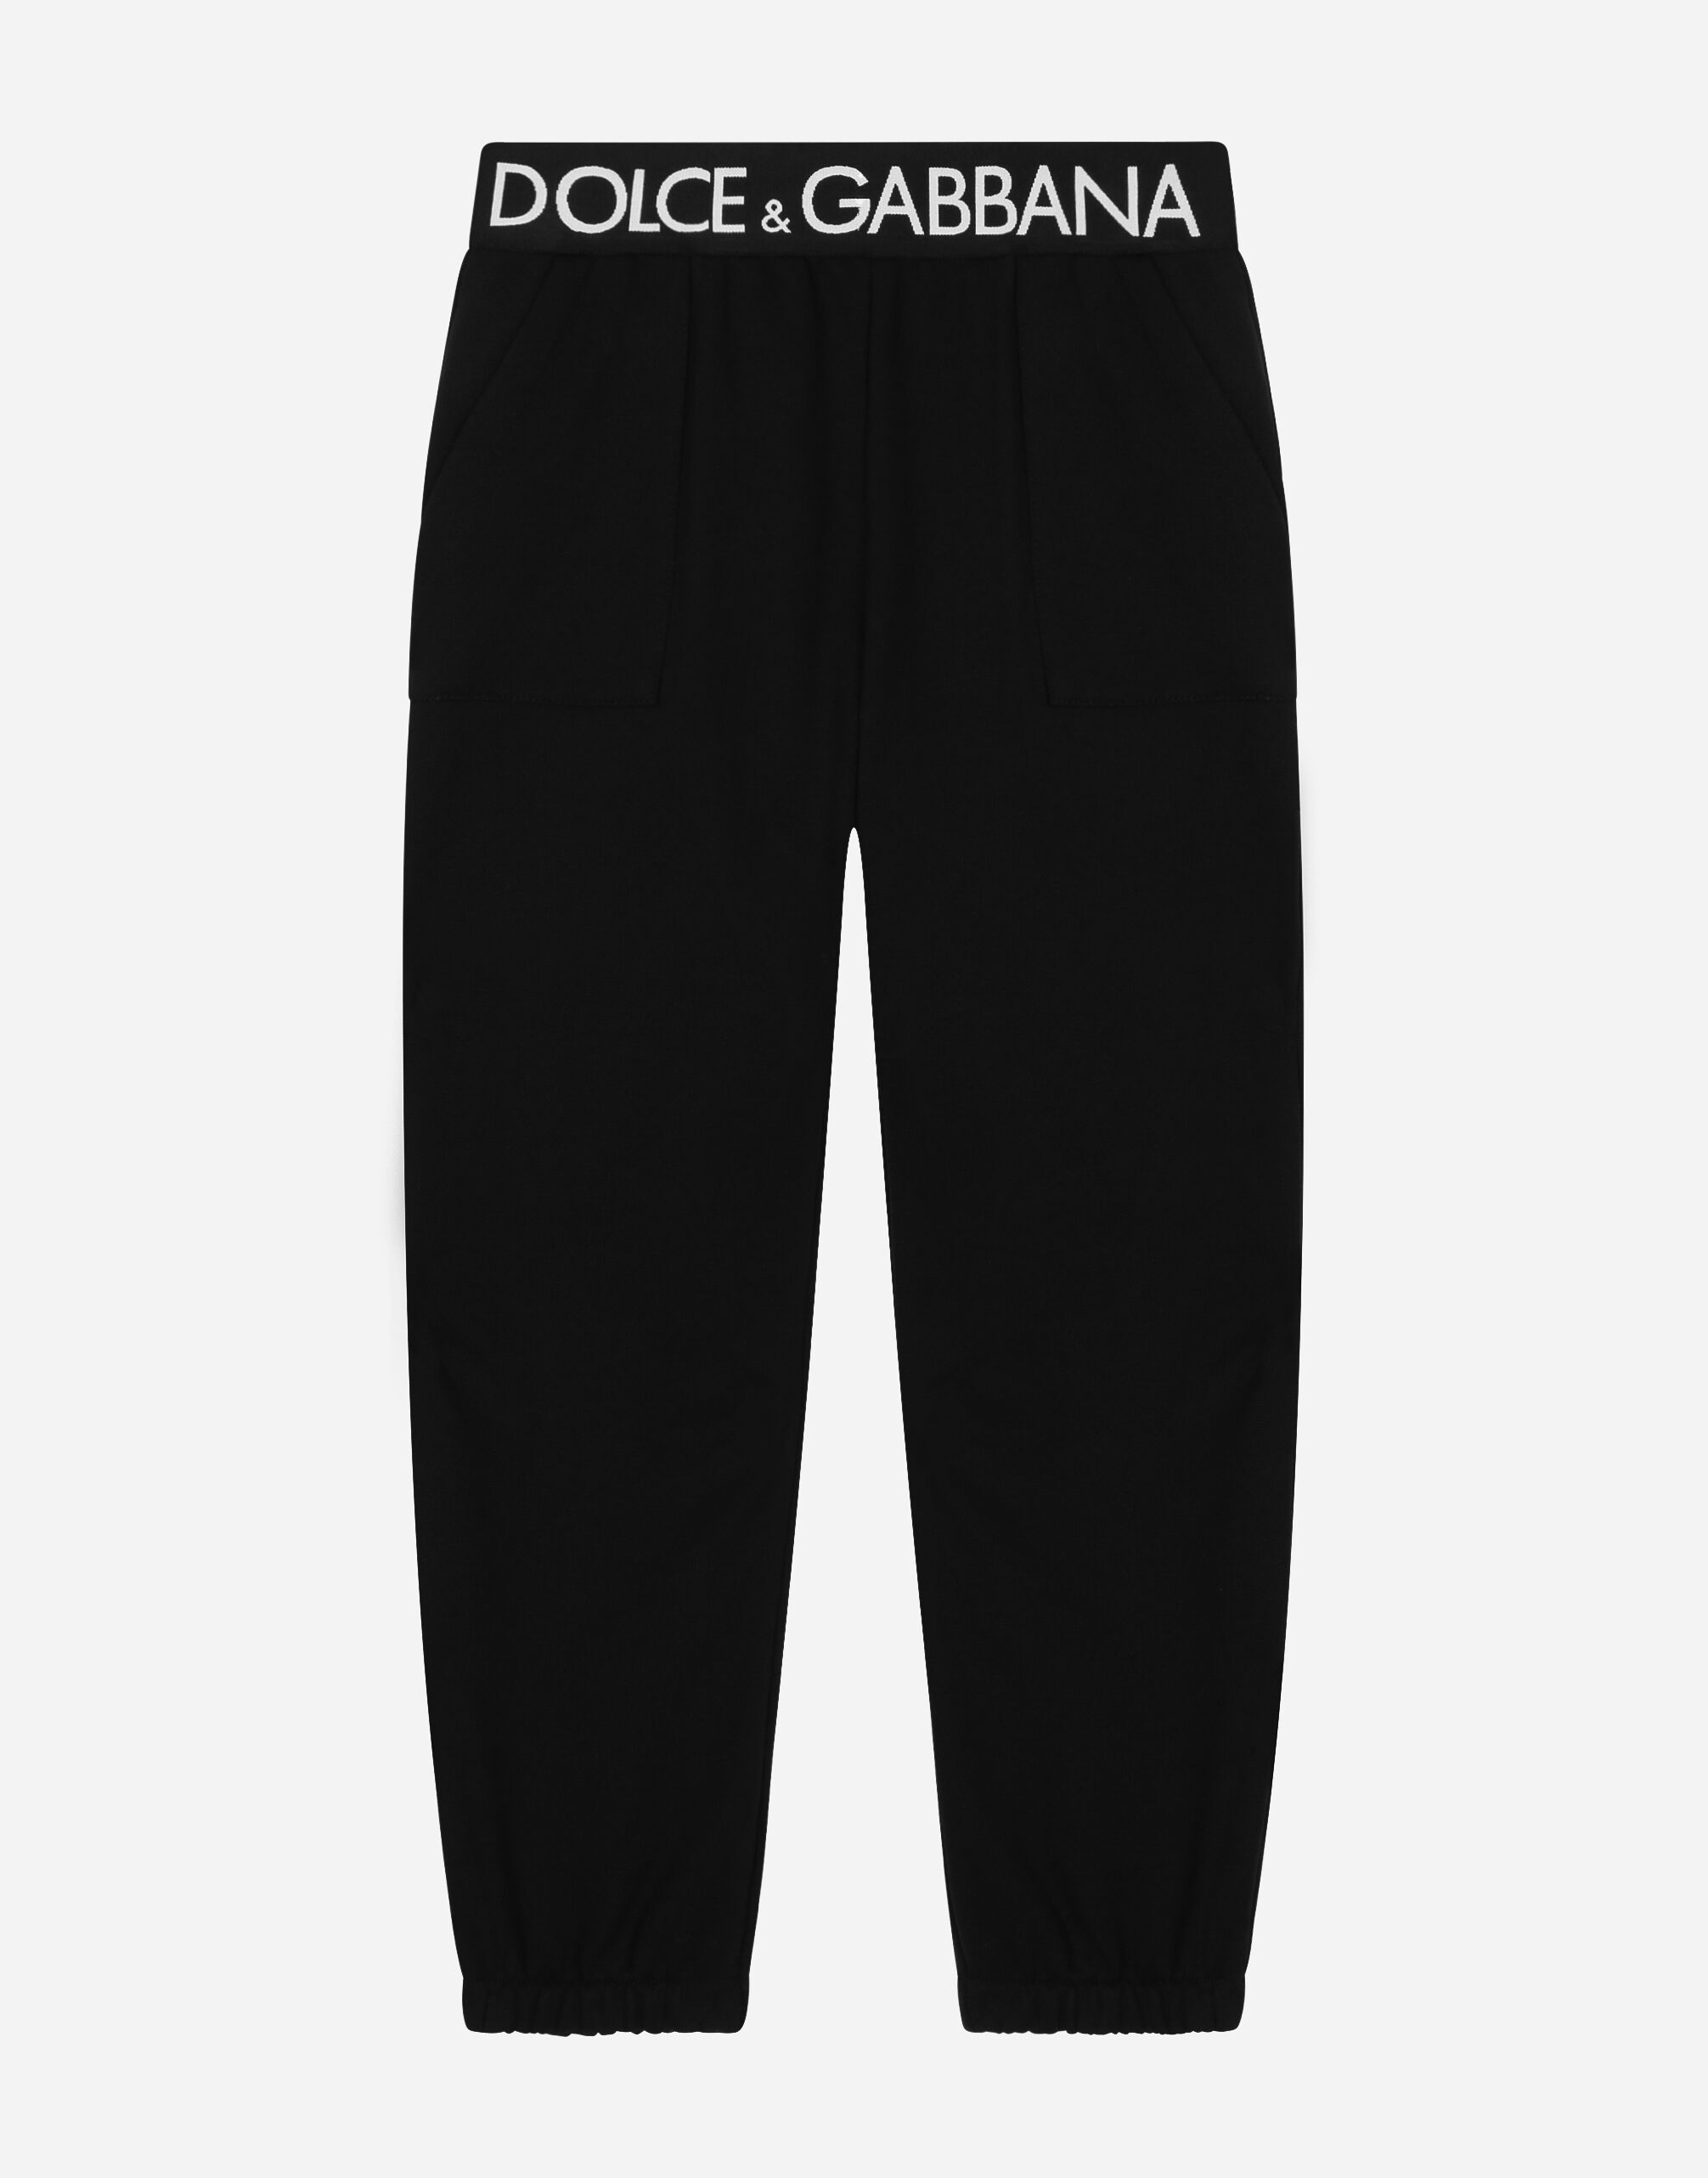 Dolce&Gabbana Jersey jogging pants with branded elastic waistband Black L5JPC3G7KN8